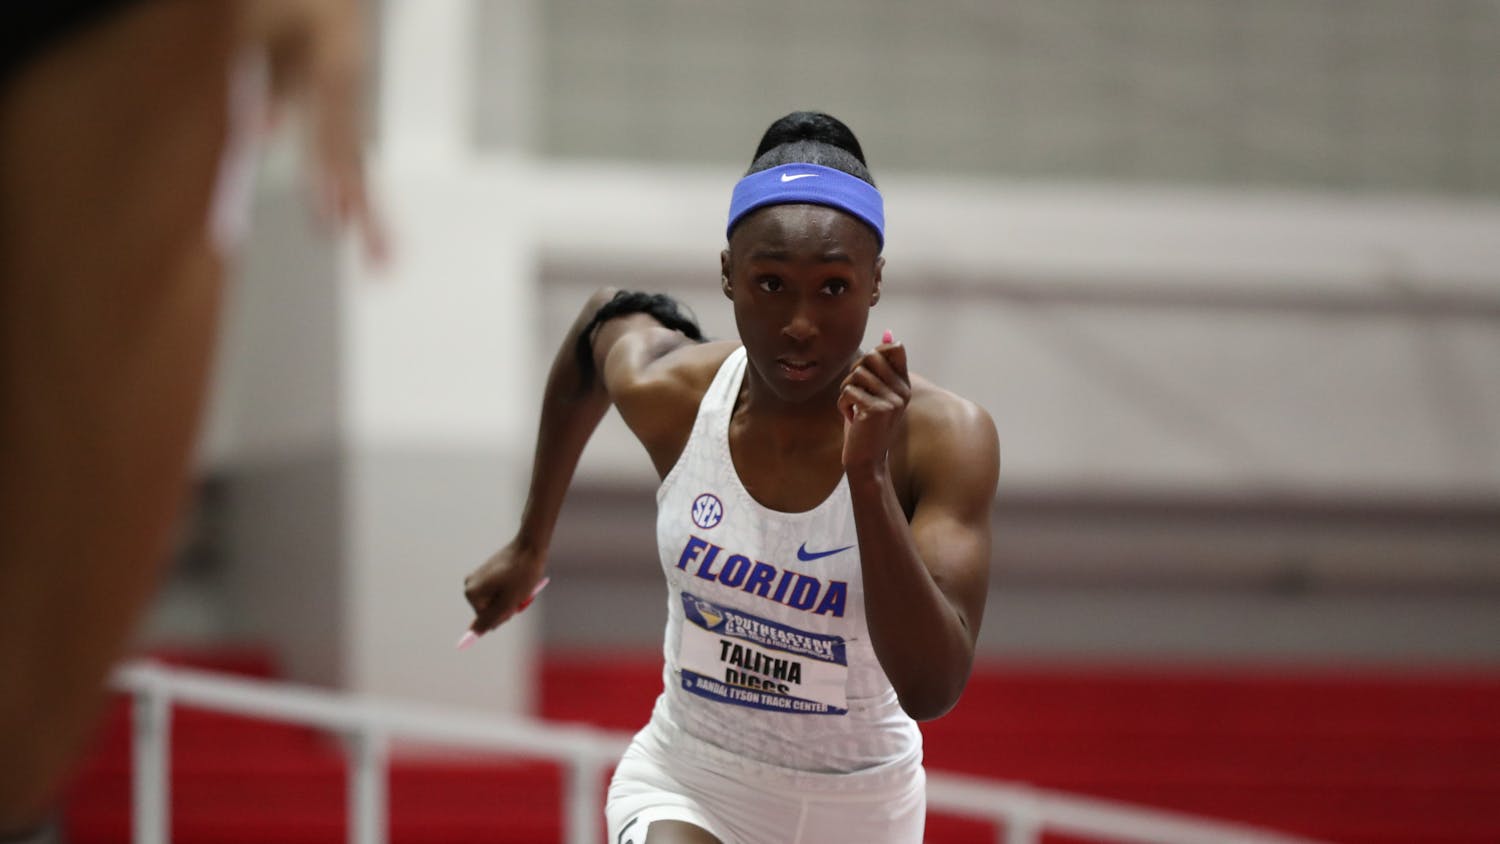 Florida’s Talitha Diggs competes during the SEC Indoor Track and Field Championships on Saturday, February 27, 2021 at Randal Tyson Track Center in Fayetteville, Ark. / UAA Communications photo by Alex de la Osa